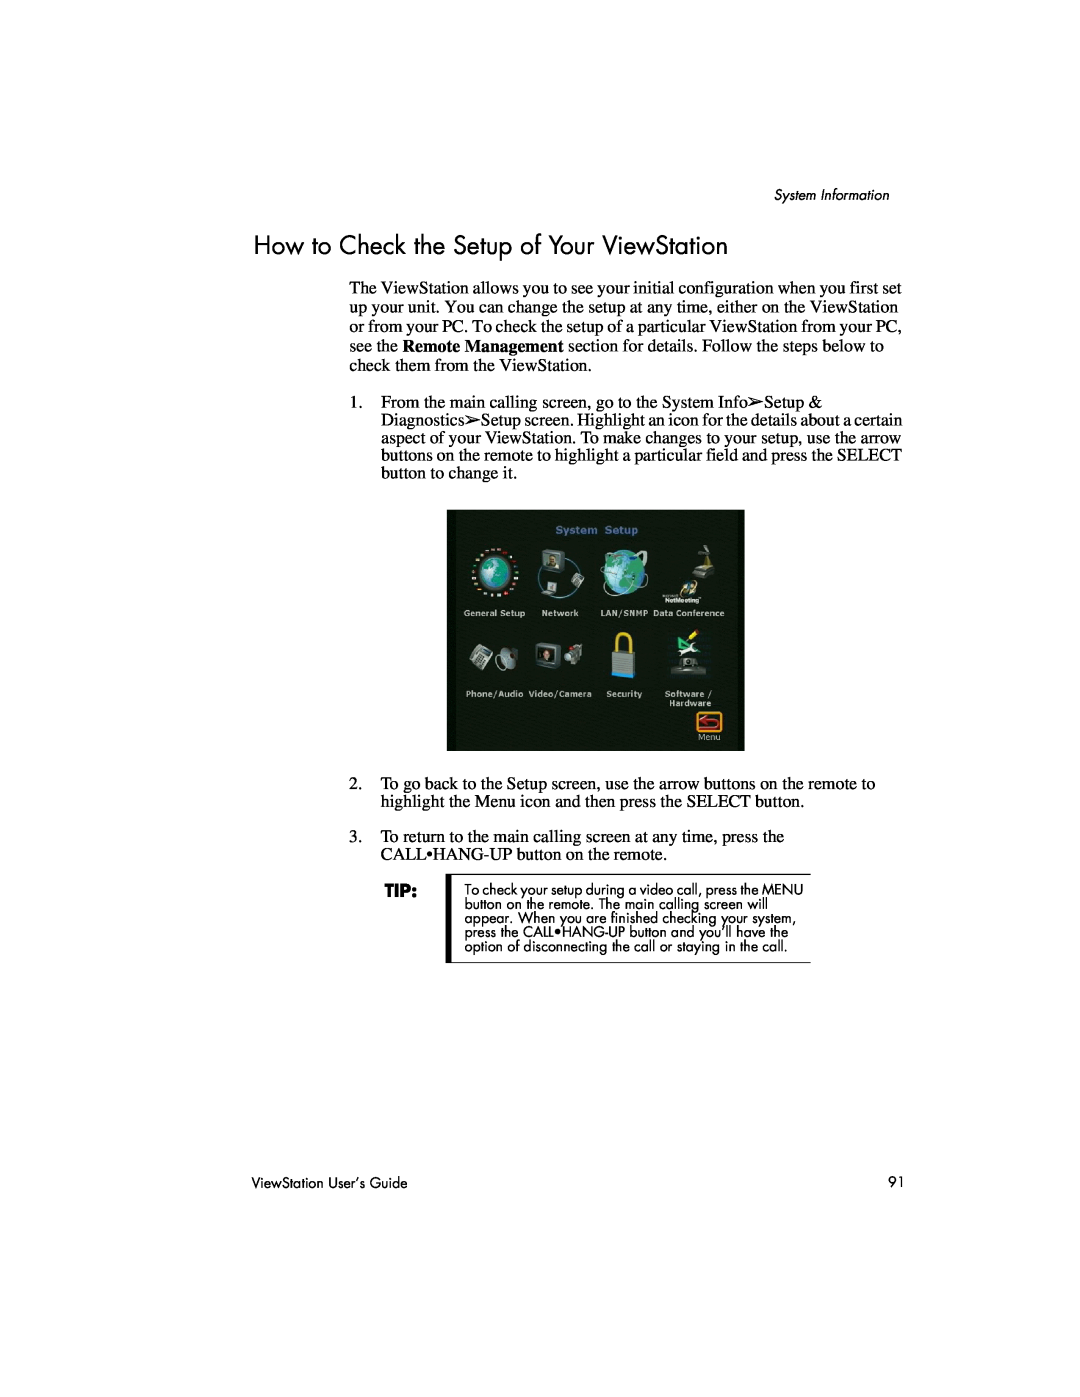 Polycom 512, 128, MP manual How to Check the Setup of Your ViewStation 